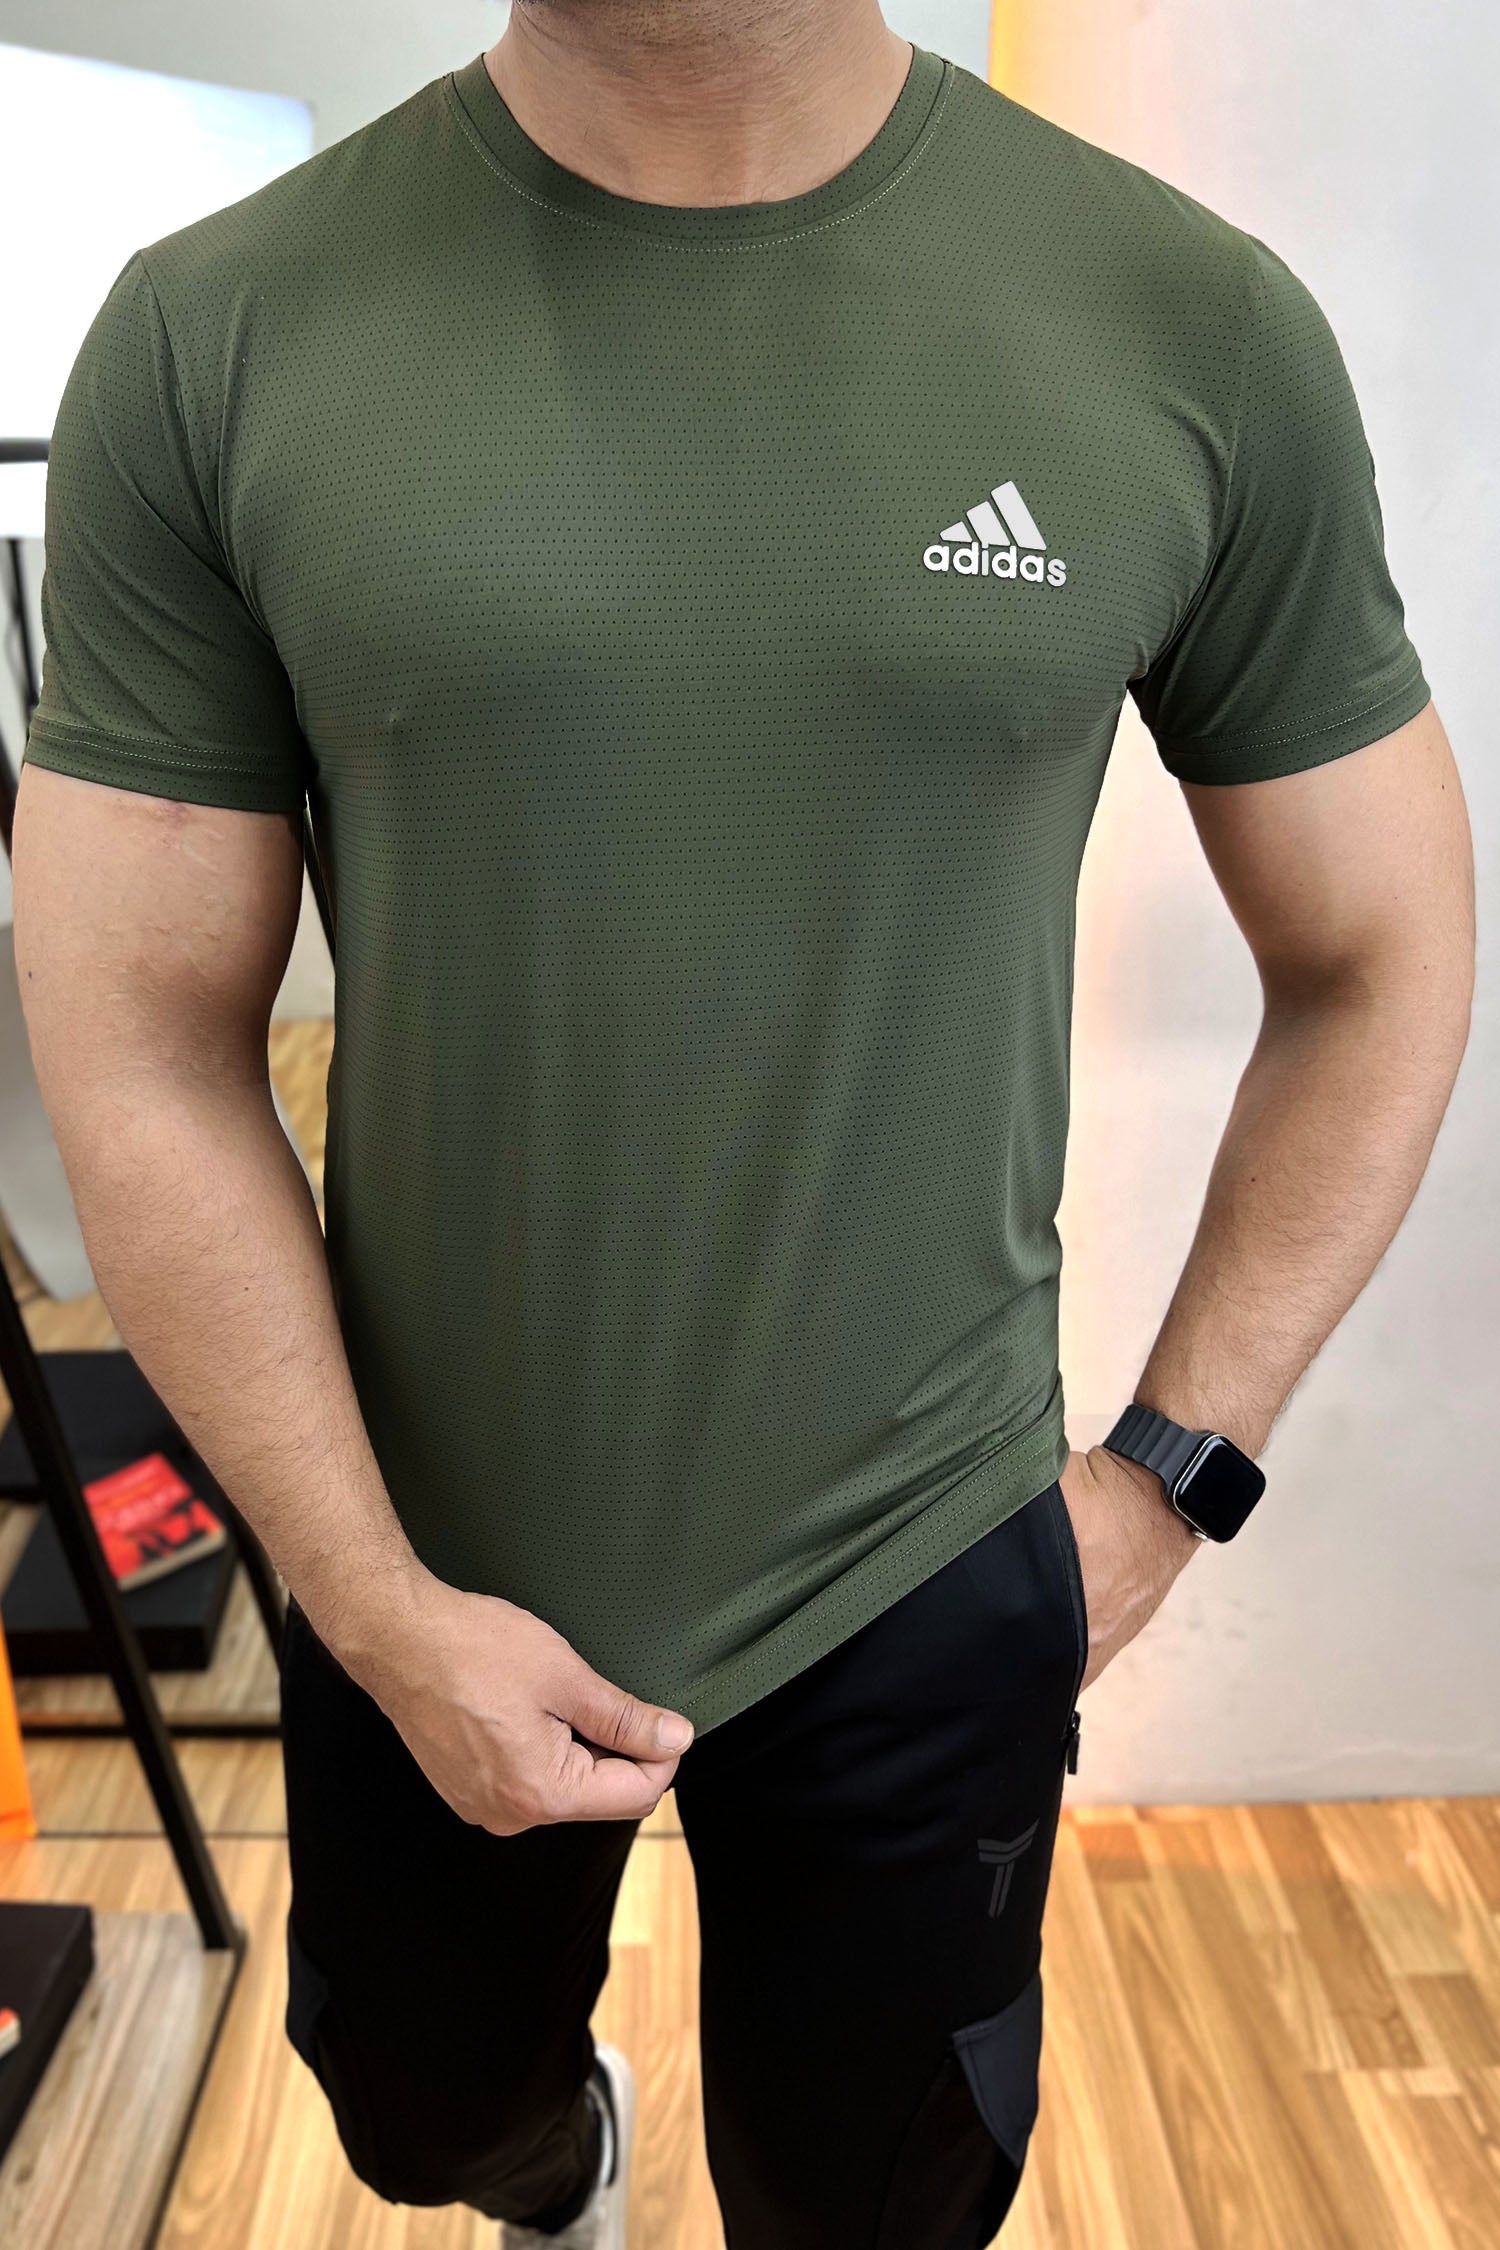 Dry Fit Crew Neck Breathable Tee With Adds Aplic Logo